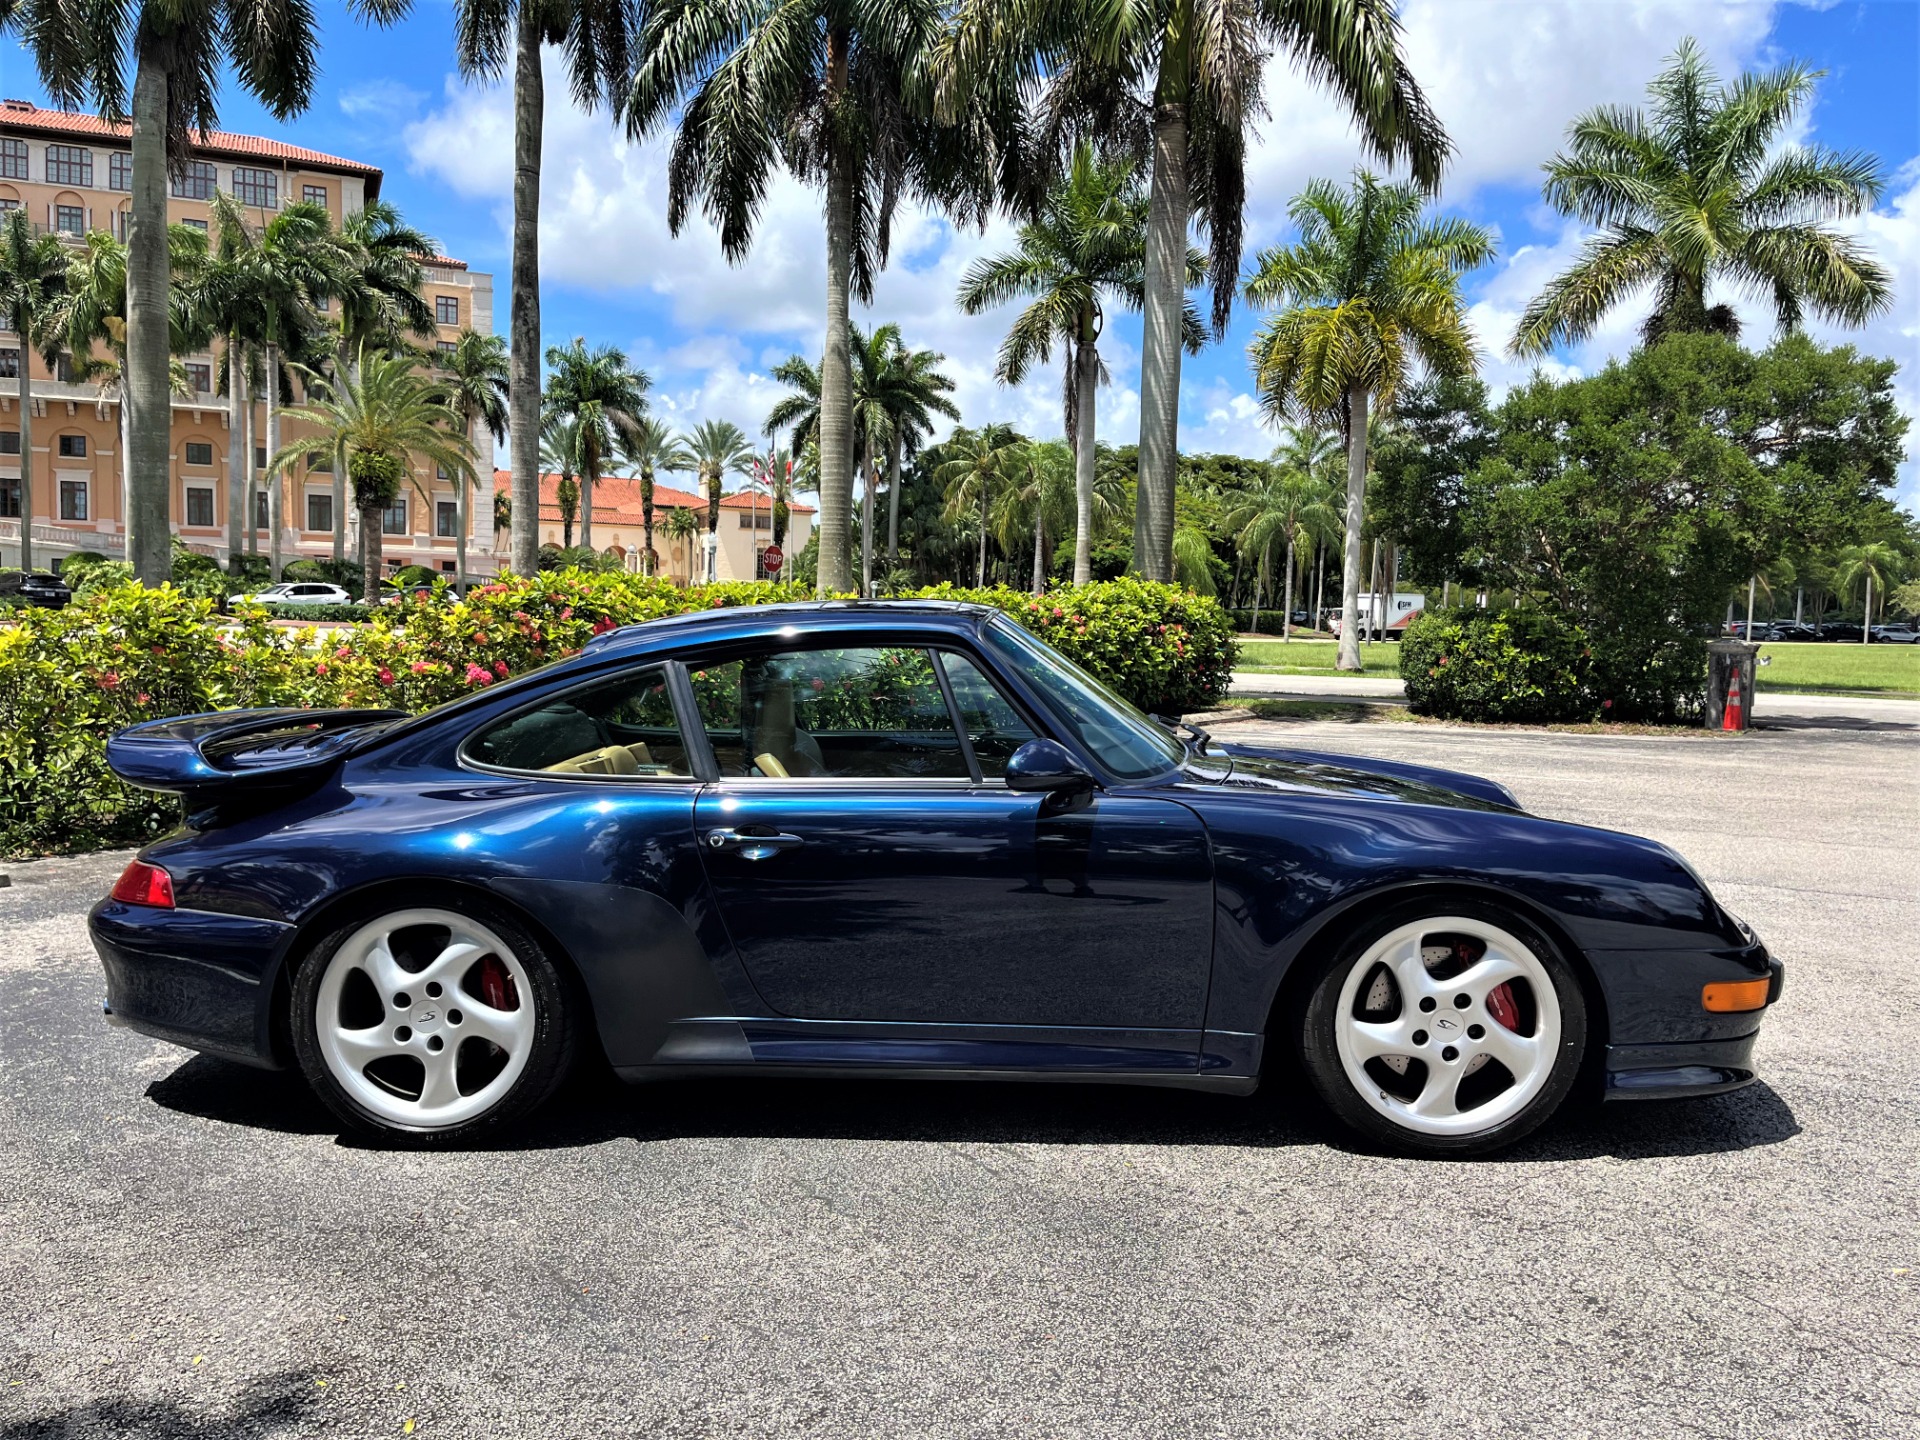 Used 1998 Porsche 911 Carrera 4S for sale Sold at The Gables Sports Cars in Miami FL 33146 4